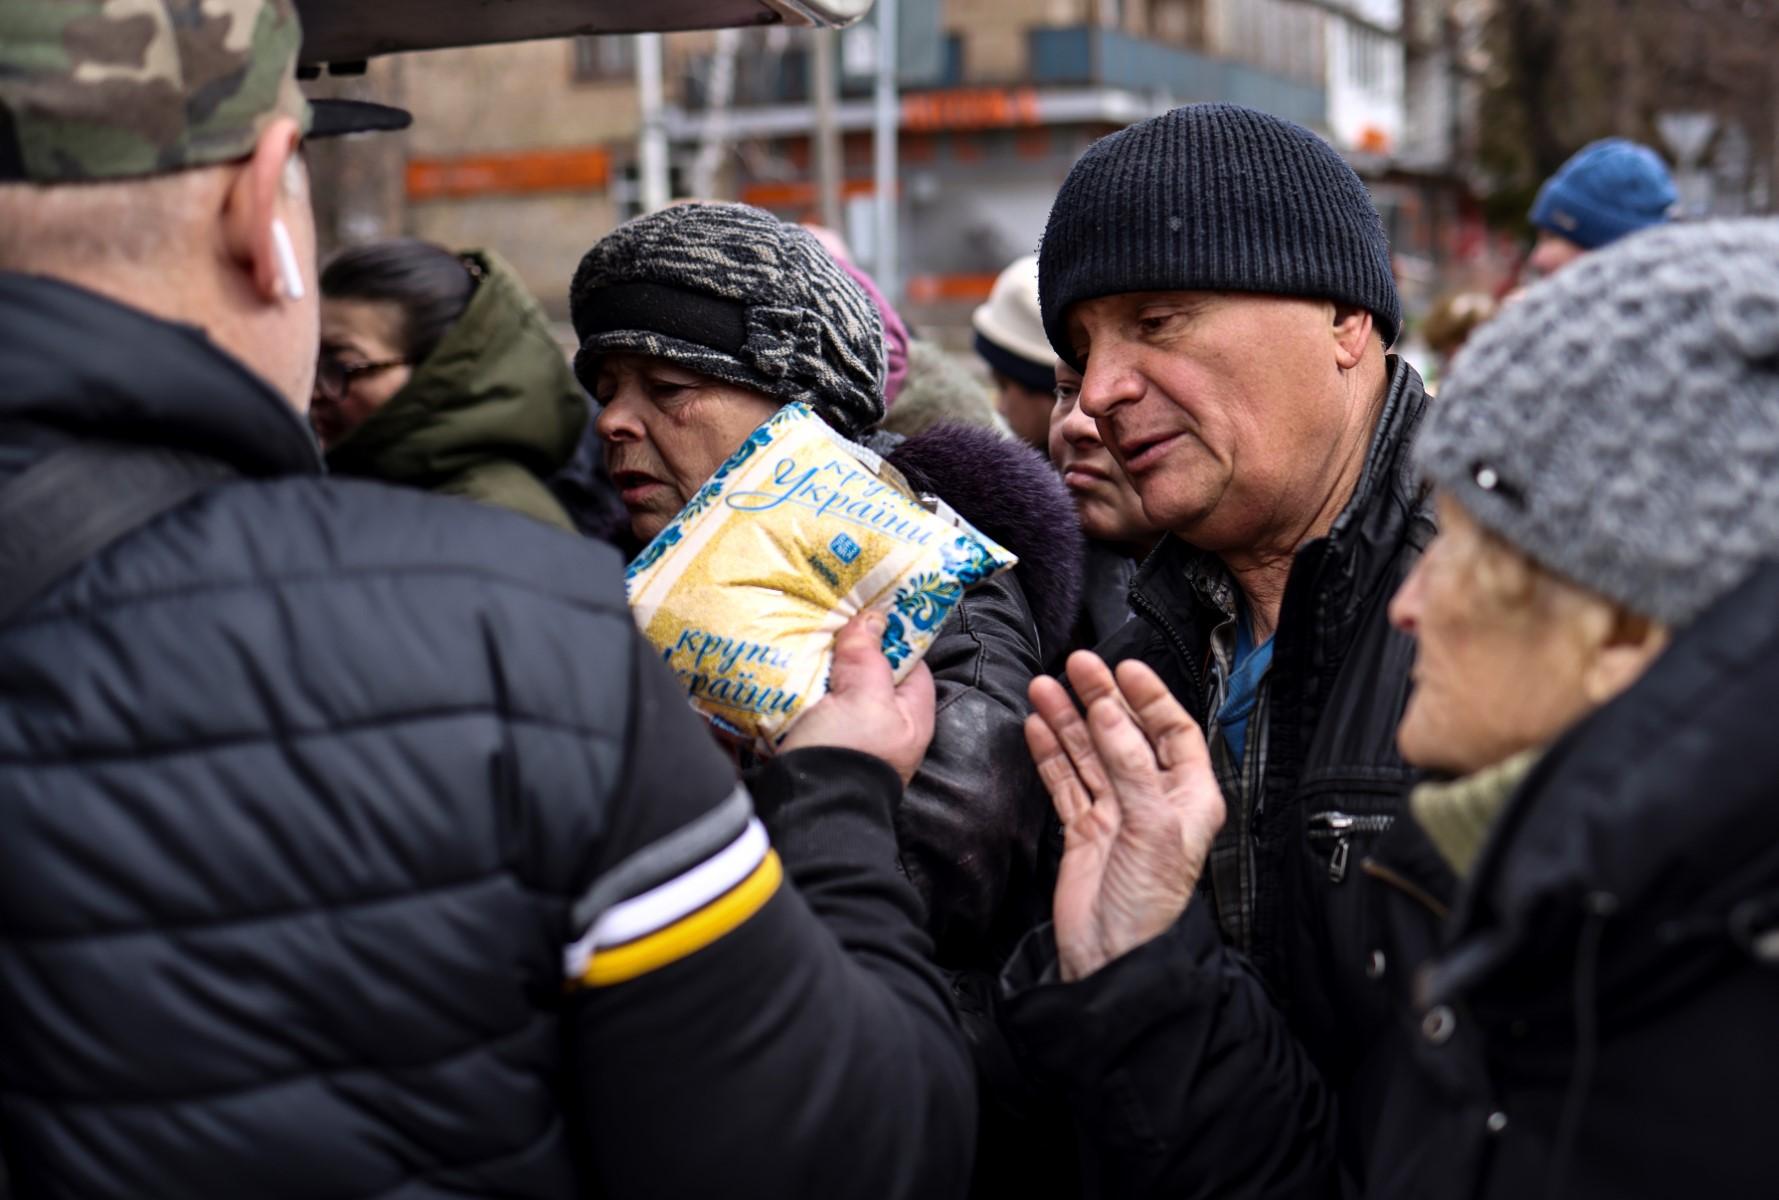 Bucha residents gather at a food donation point in Bucha, northwest of Kyiv, on April 6, during Russia's military invasion launched on Ukraine. Photo: AFP